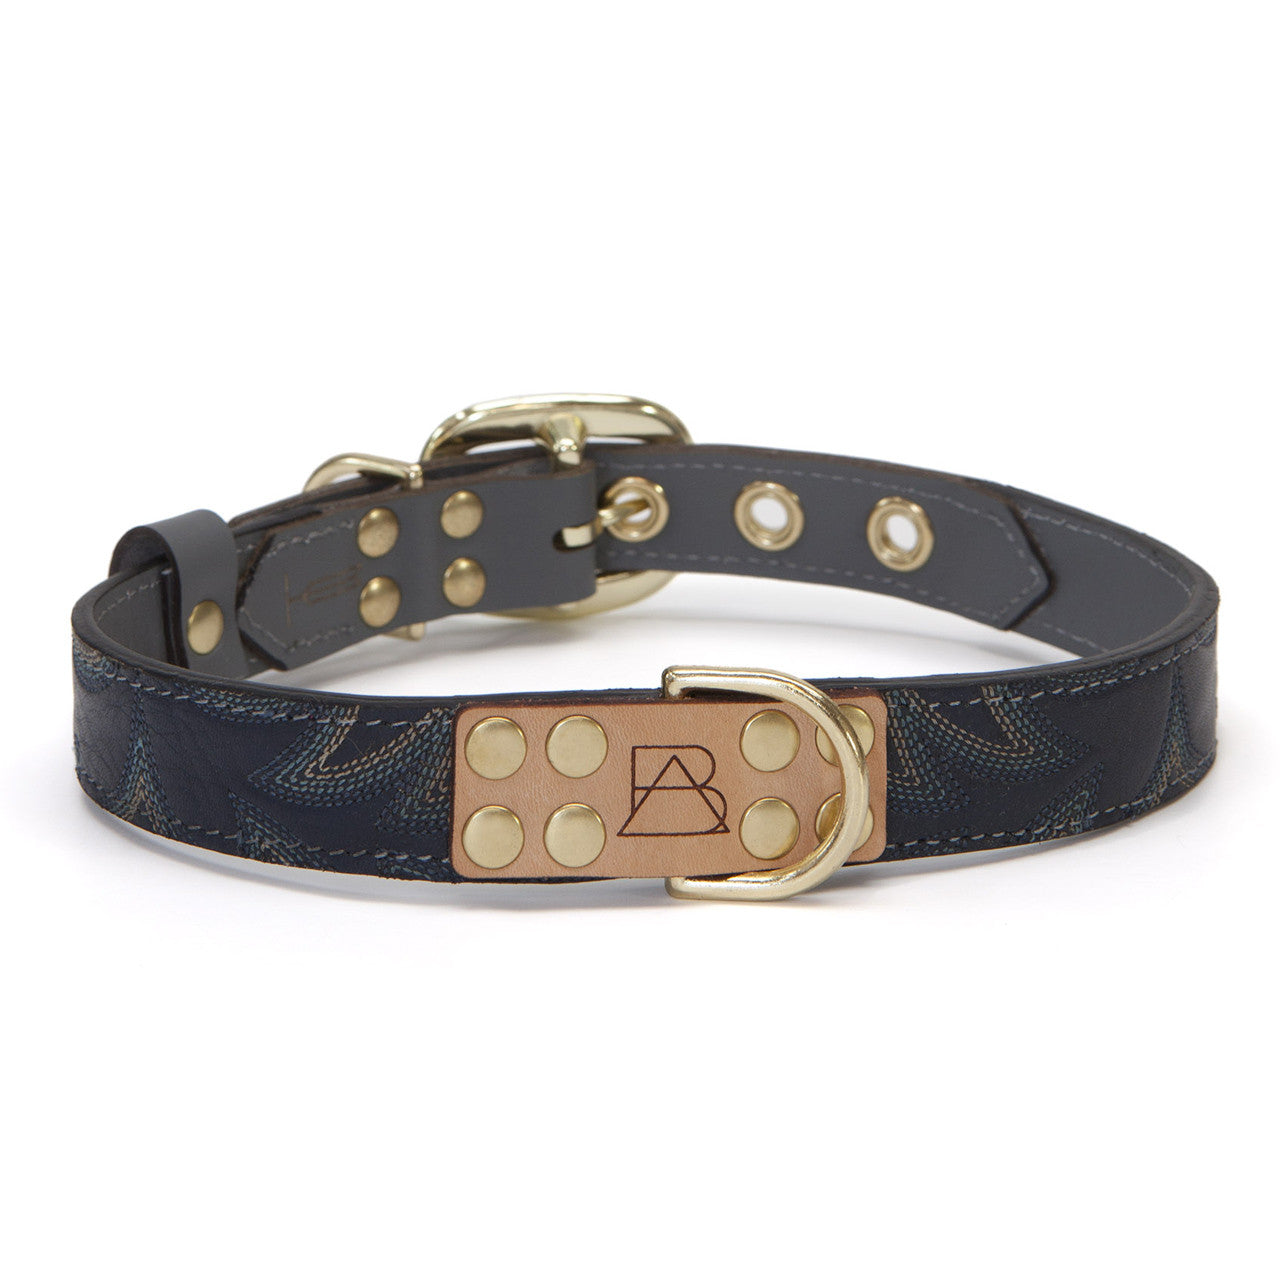 Need some help with info on LV Baxter dog collar